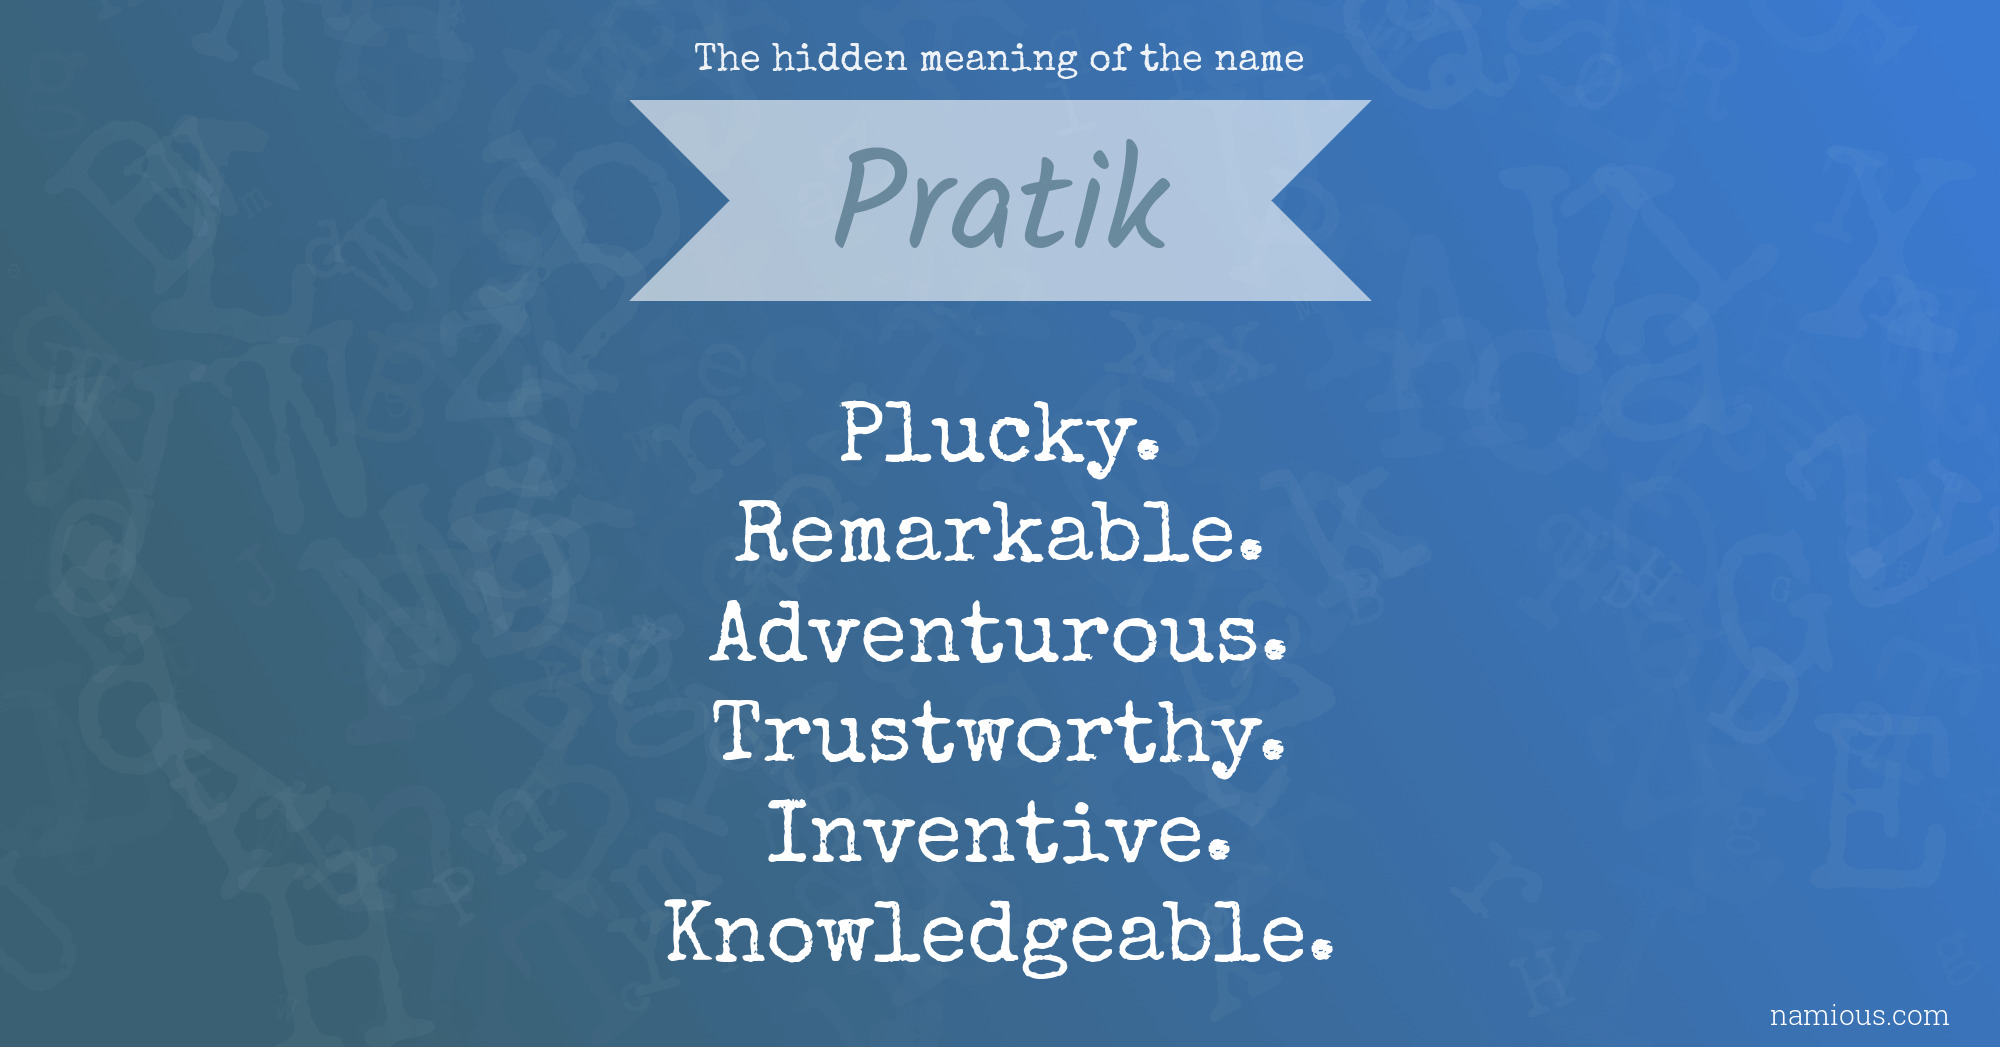 The hidden meaning of the name Pratik